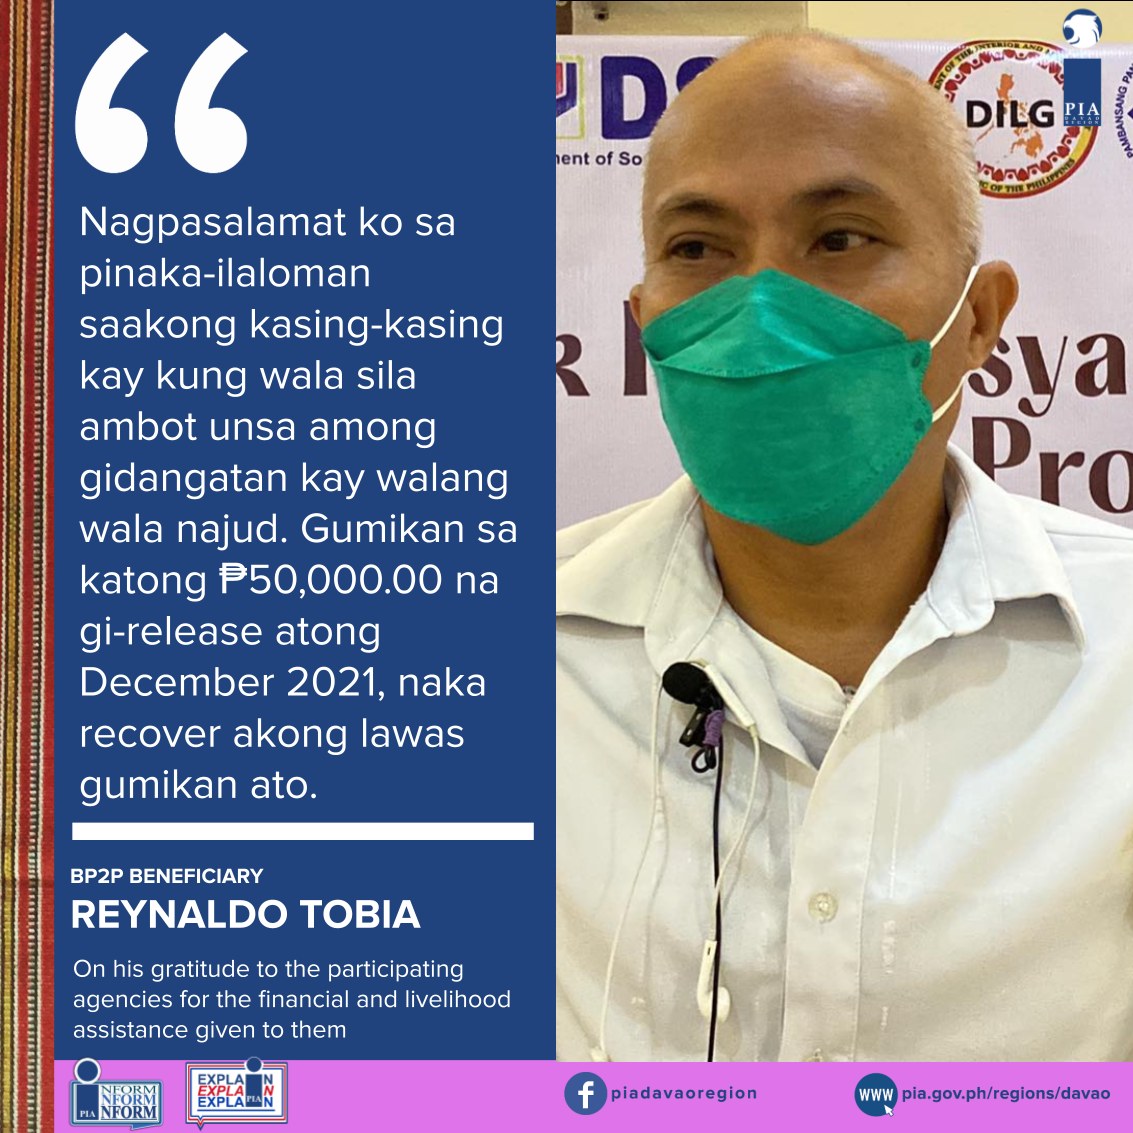 His gratitude to the participating agencies of BP2P